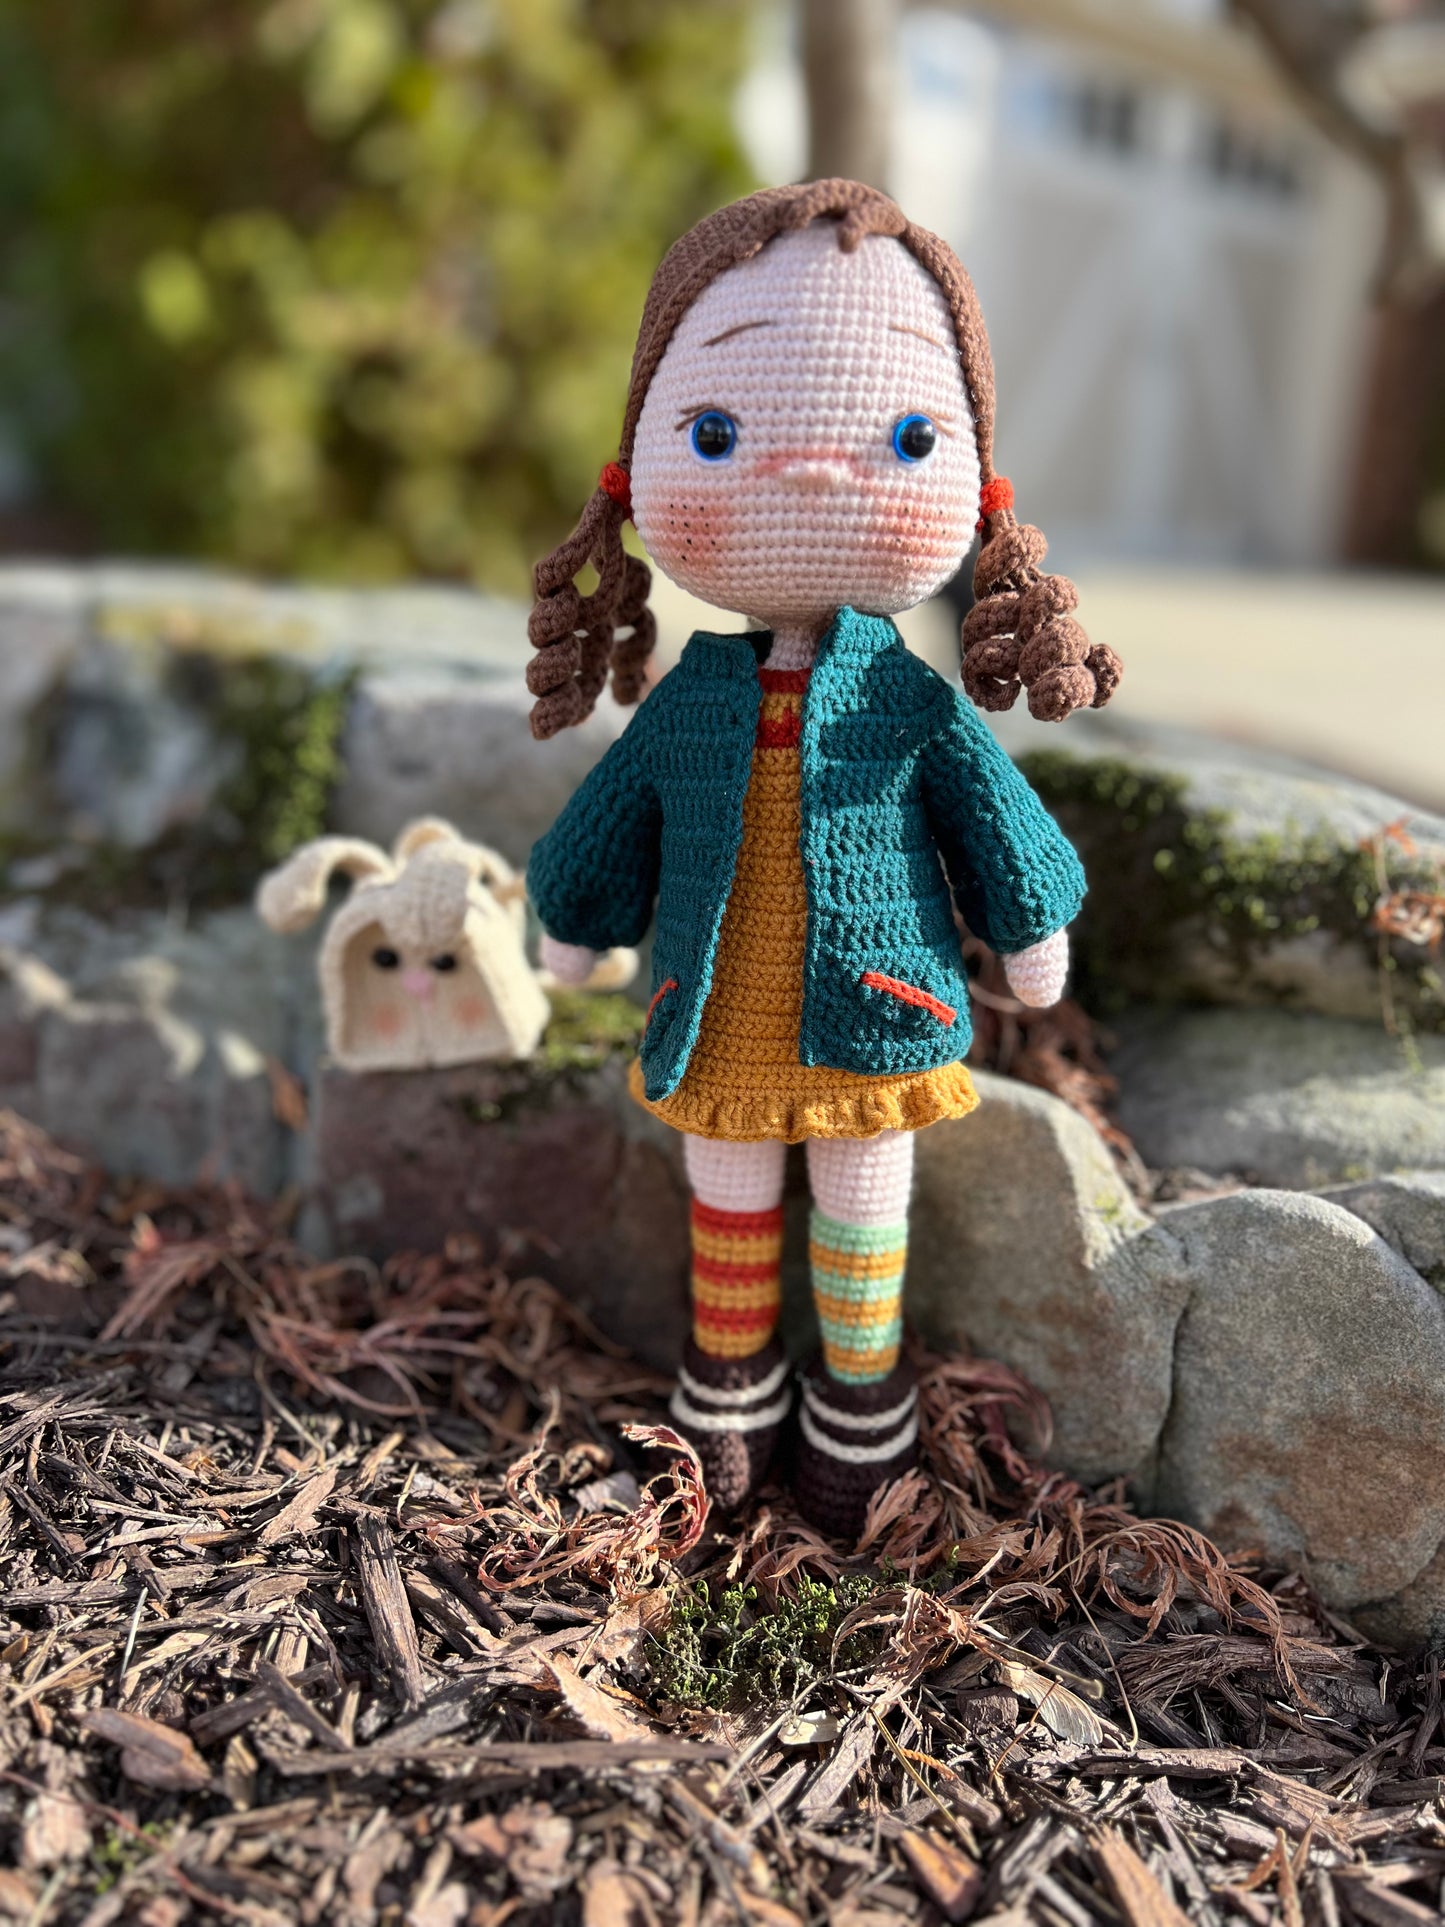 Crocheted Girl with Bunny Backpack, Readymade Amigurumi Doll, Handcrafted, Kids Gifts, Artisan Doll, Limited Edition Baby Dolls, Collectible Handmade